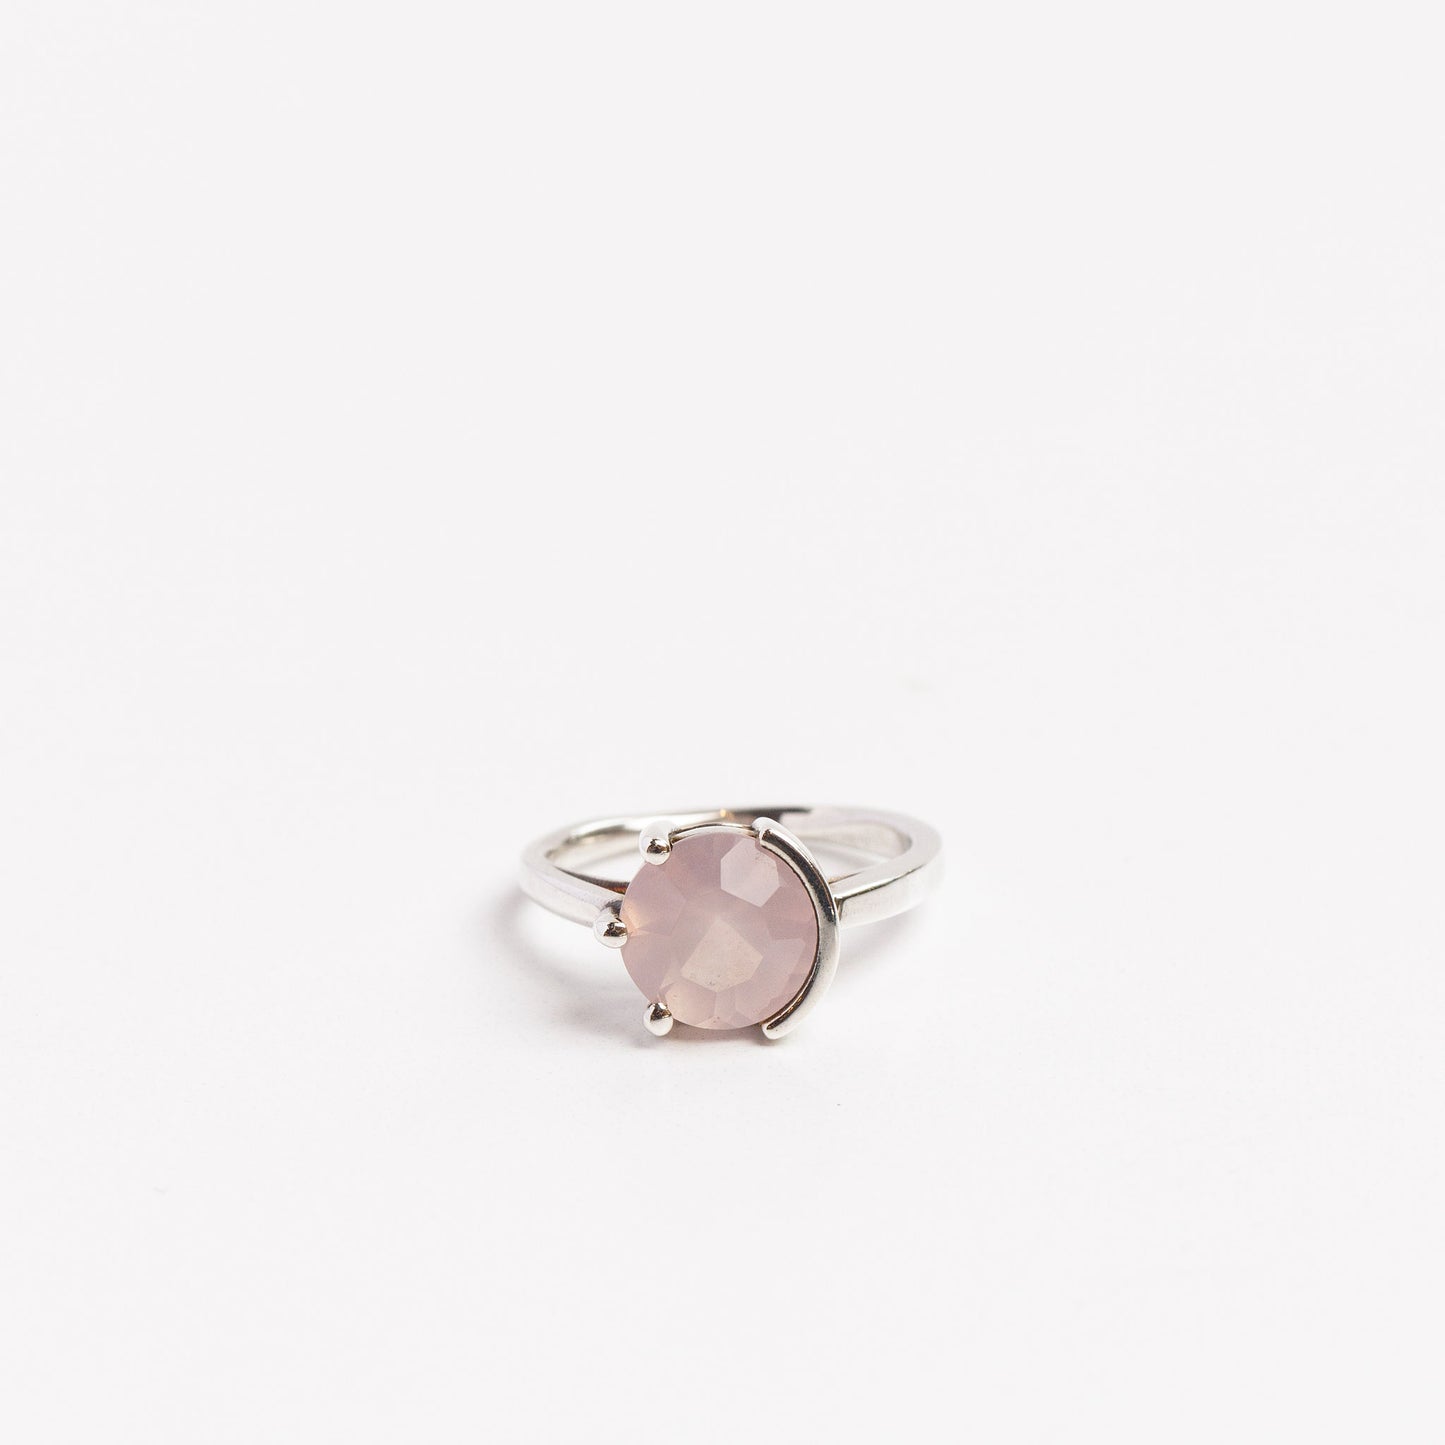 sterling silver ring with round rose quartz half prong half bezel set on a white background